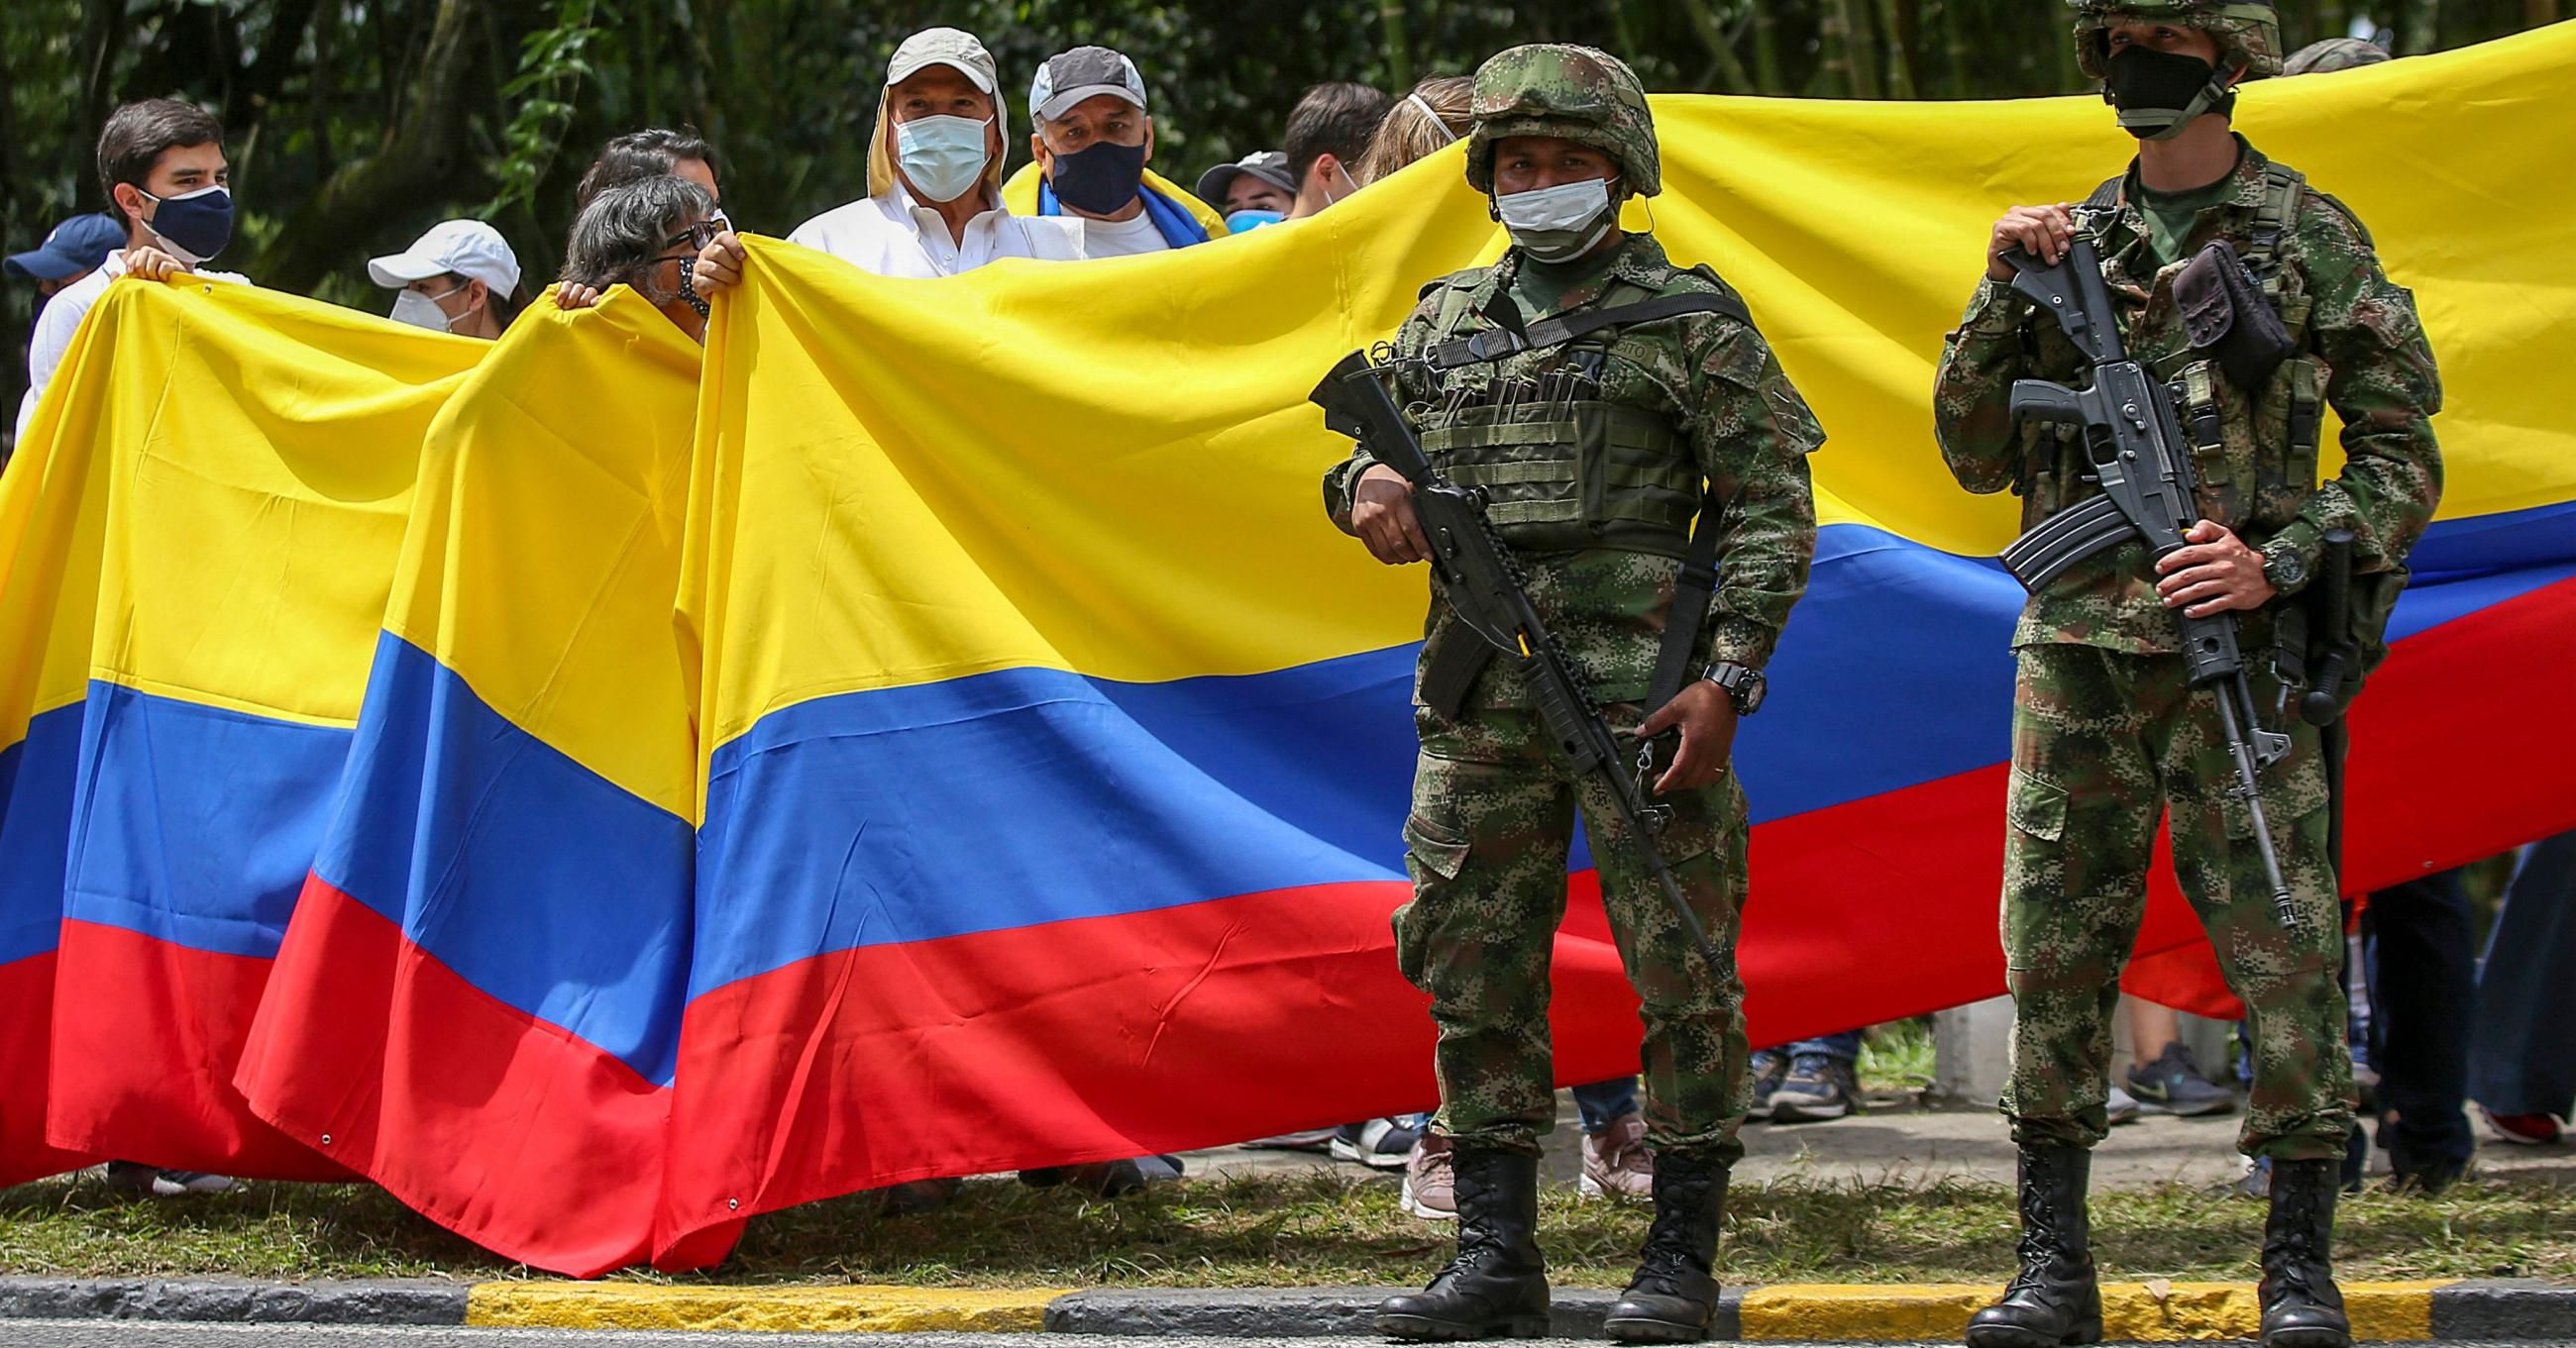 Colombian soldiers stand by as people march during a national strike in the city of Cali on May 8, 2021.